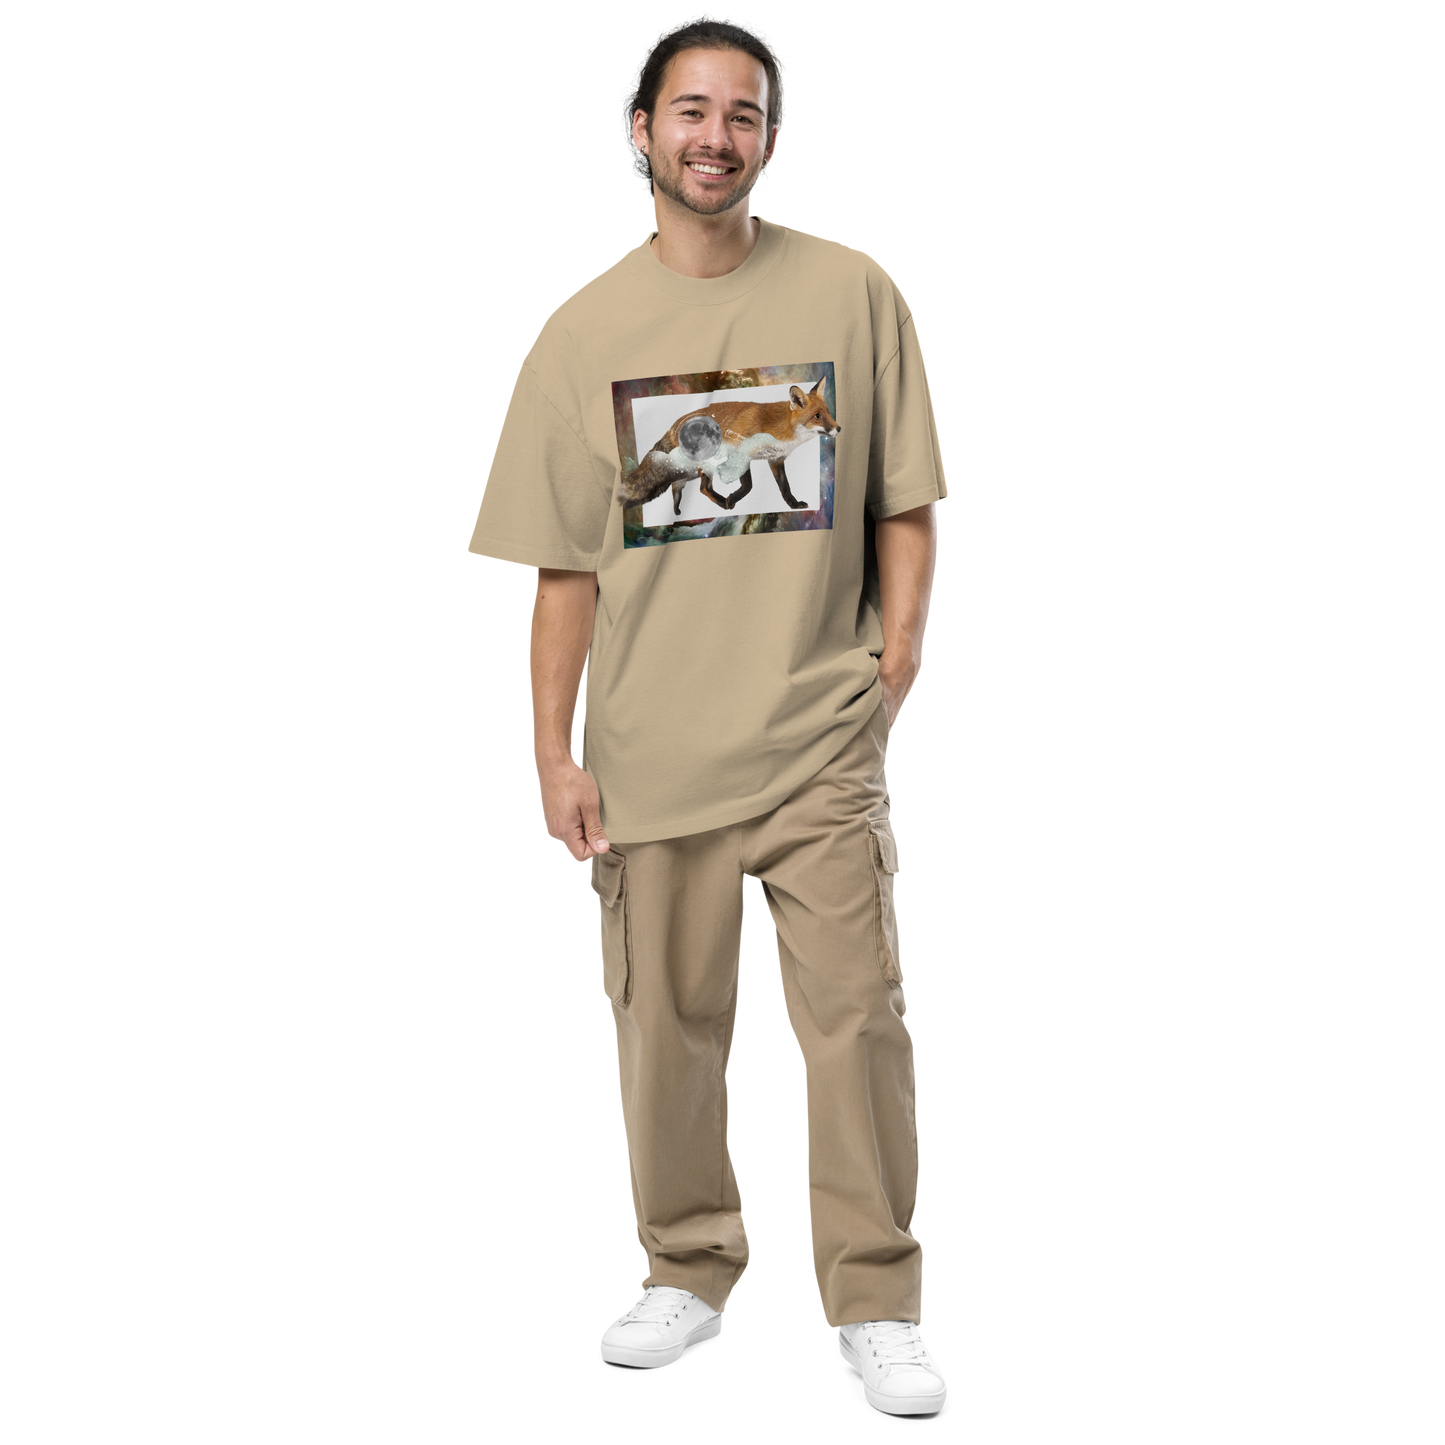 Smiling man wearing a Faded Khaki Fox Oversized T-Shirt featuring a stellar Space Fox graphic on the chest - Cool Graphic Fox Oversized Tees - Boozy Fox